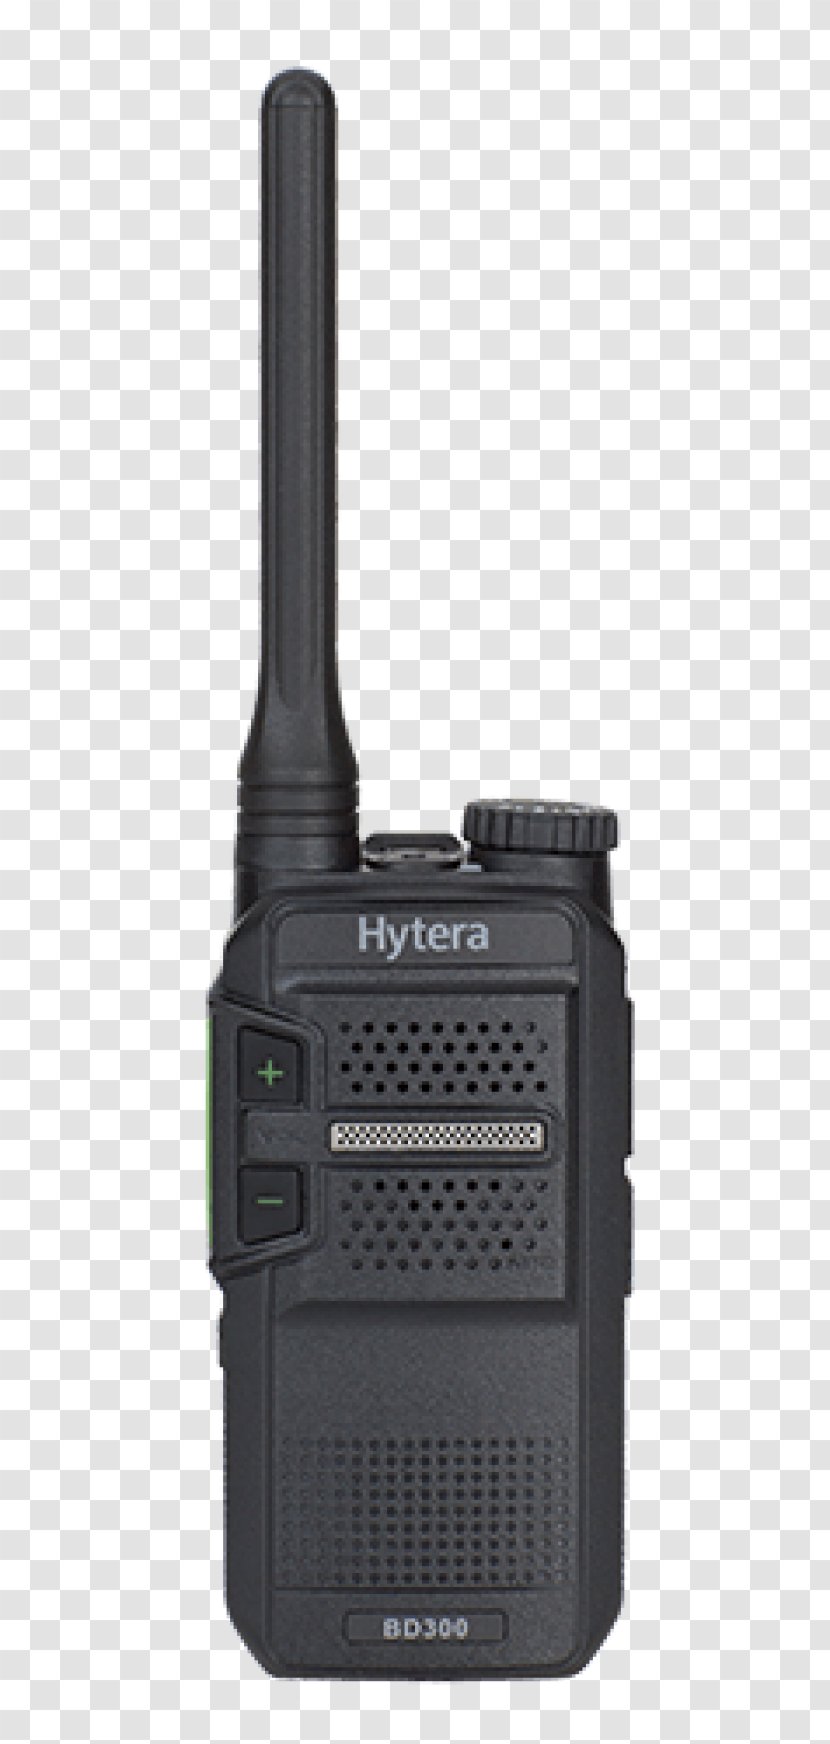 Two-way Radio Hytera Digital Mobile Broadcasting Citizens Band - Communication Device Transparent PNG